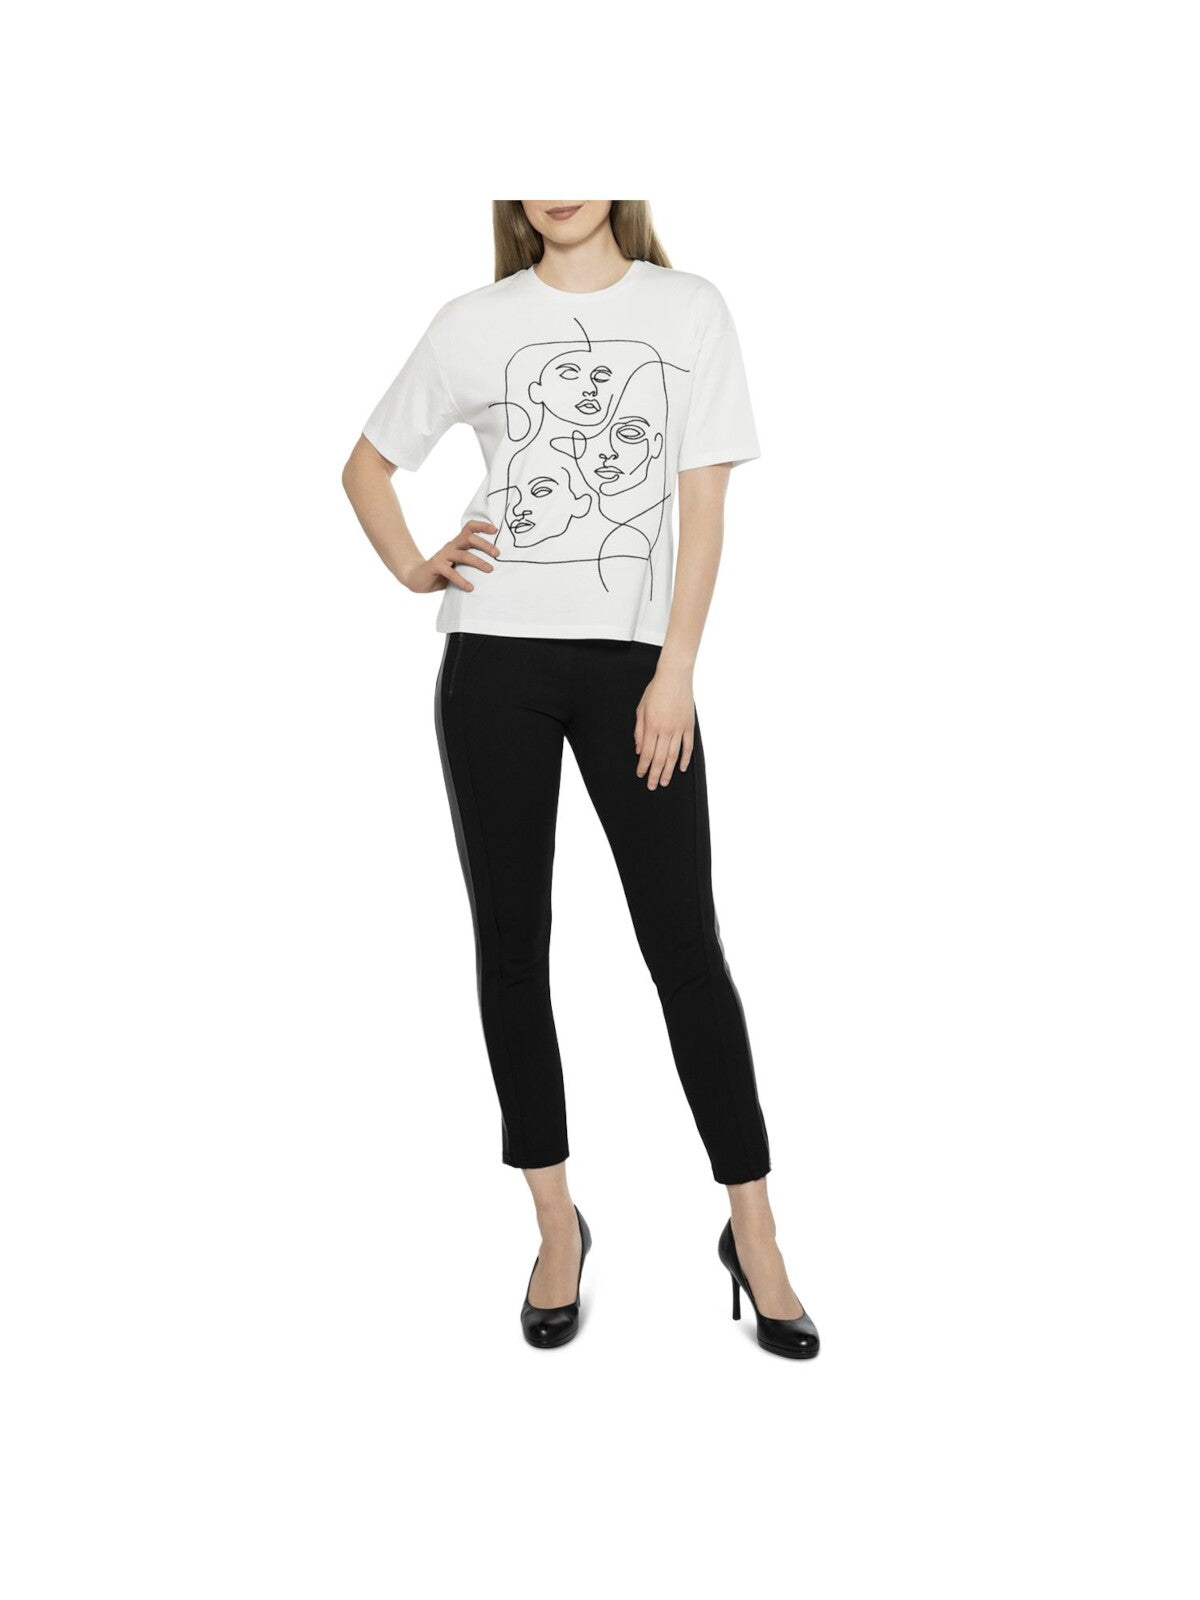 GRACIA Womens White Stretch Embroidered Graphic Short Sleeve Crew Neck T-Shirt M